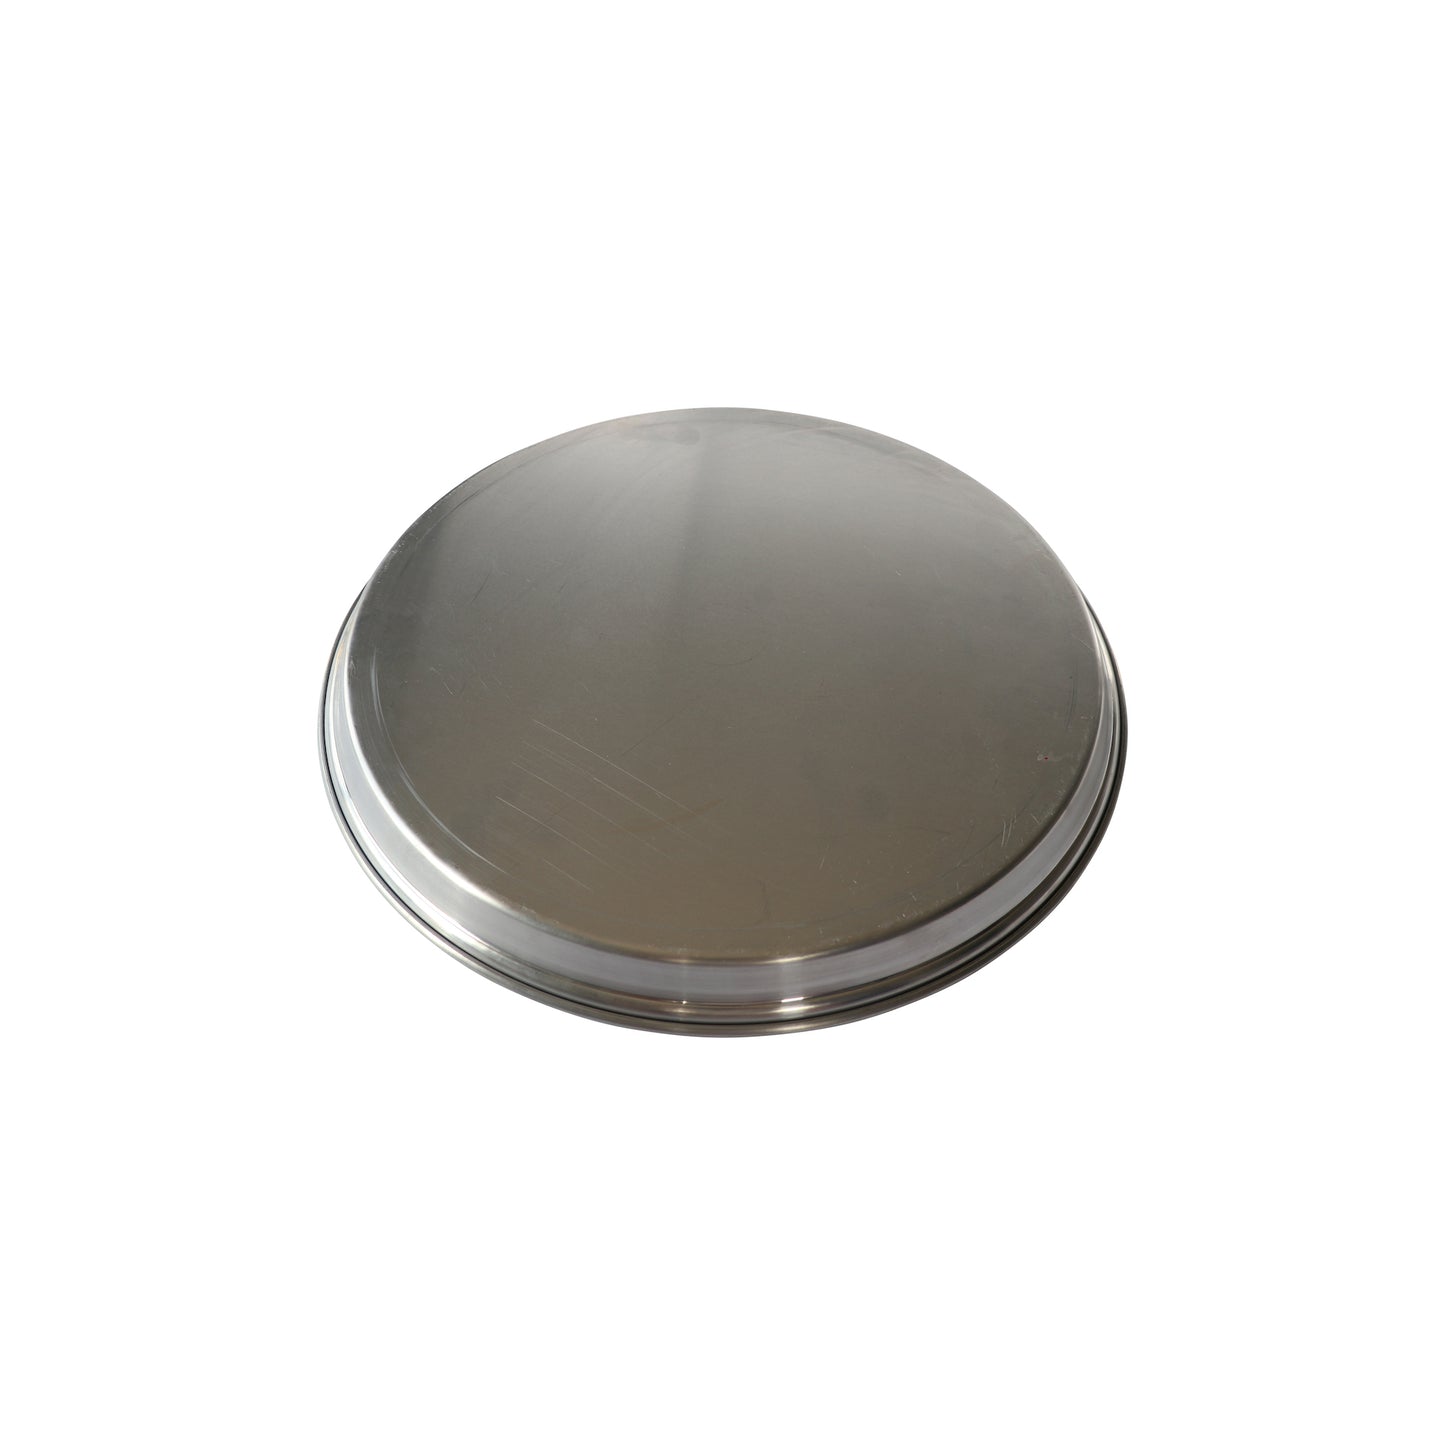 Pizza Pans with Lids 20 inch